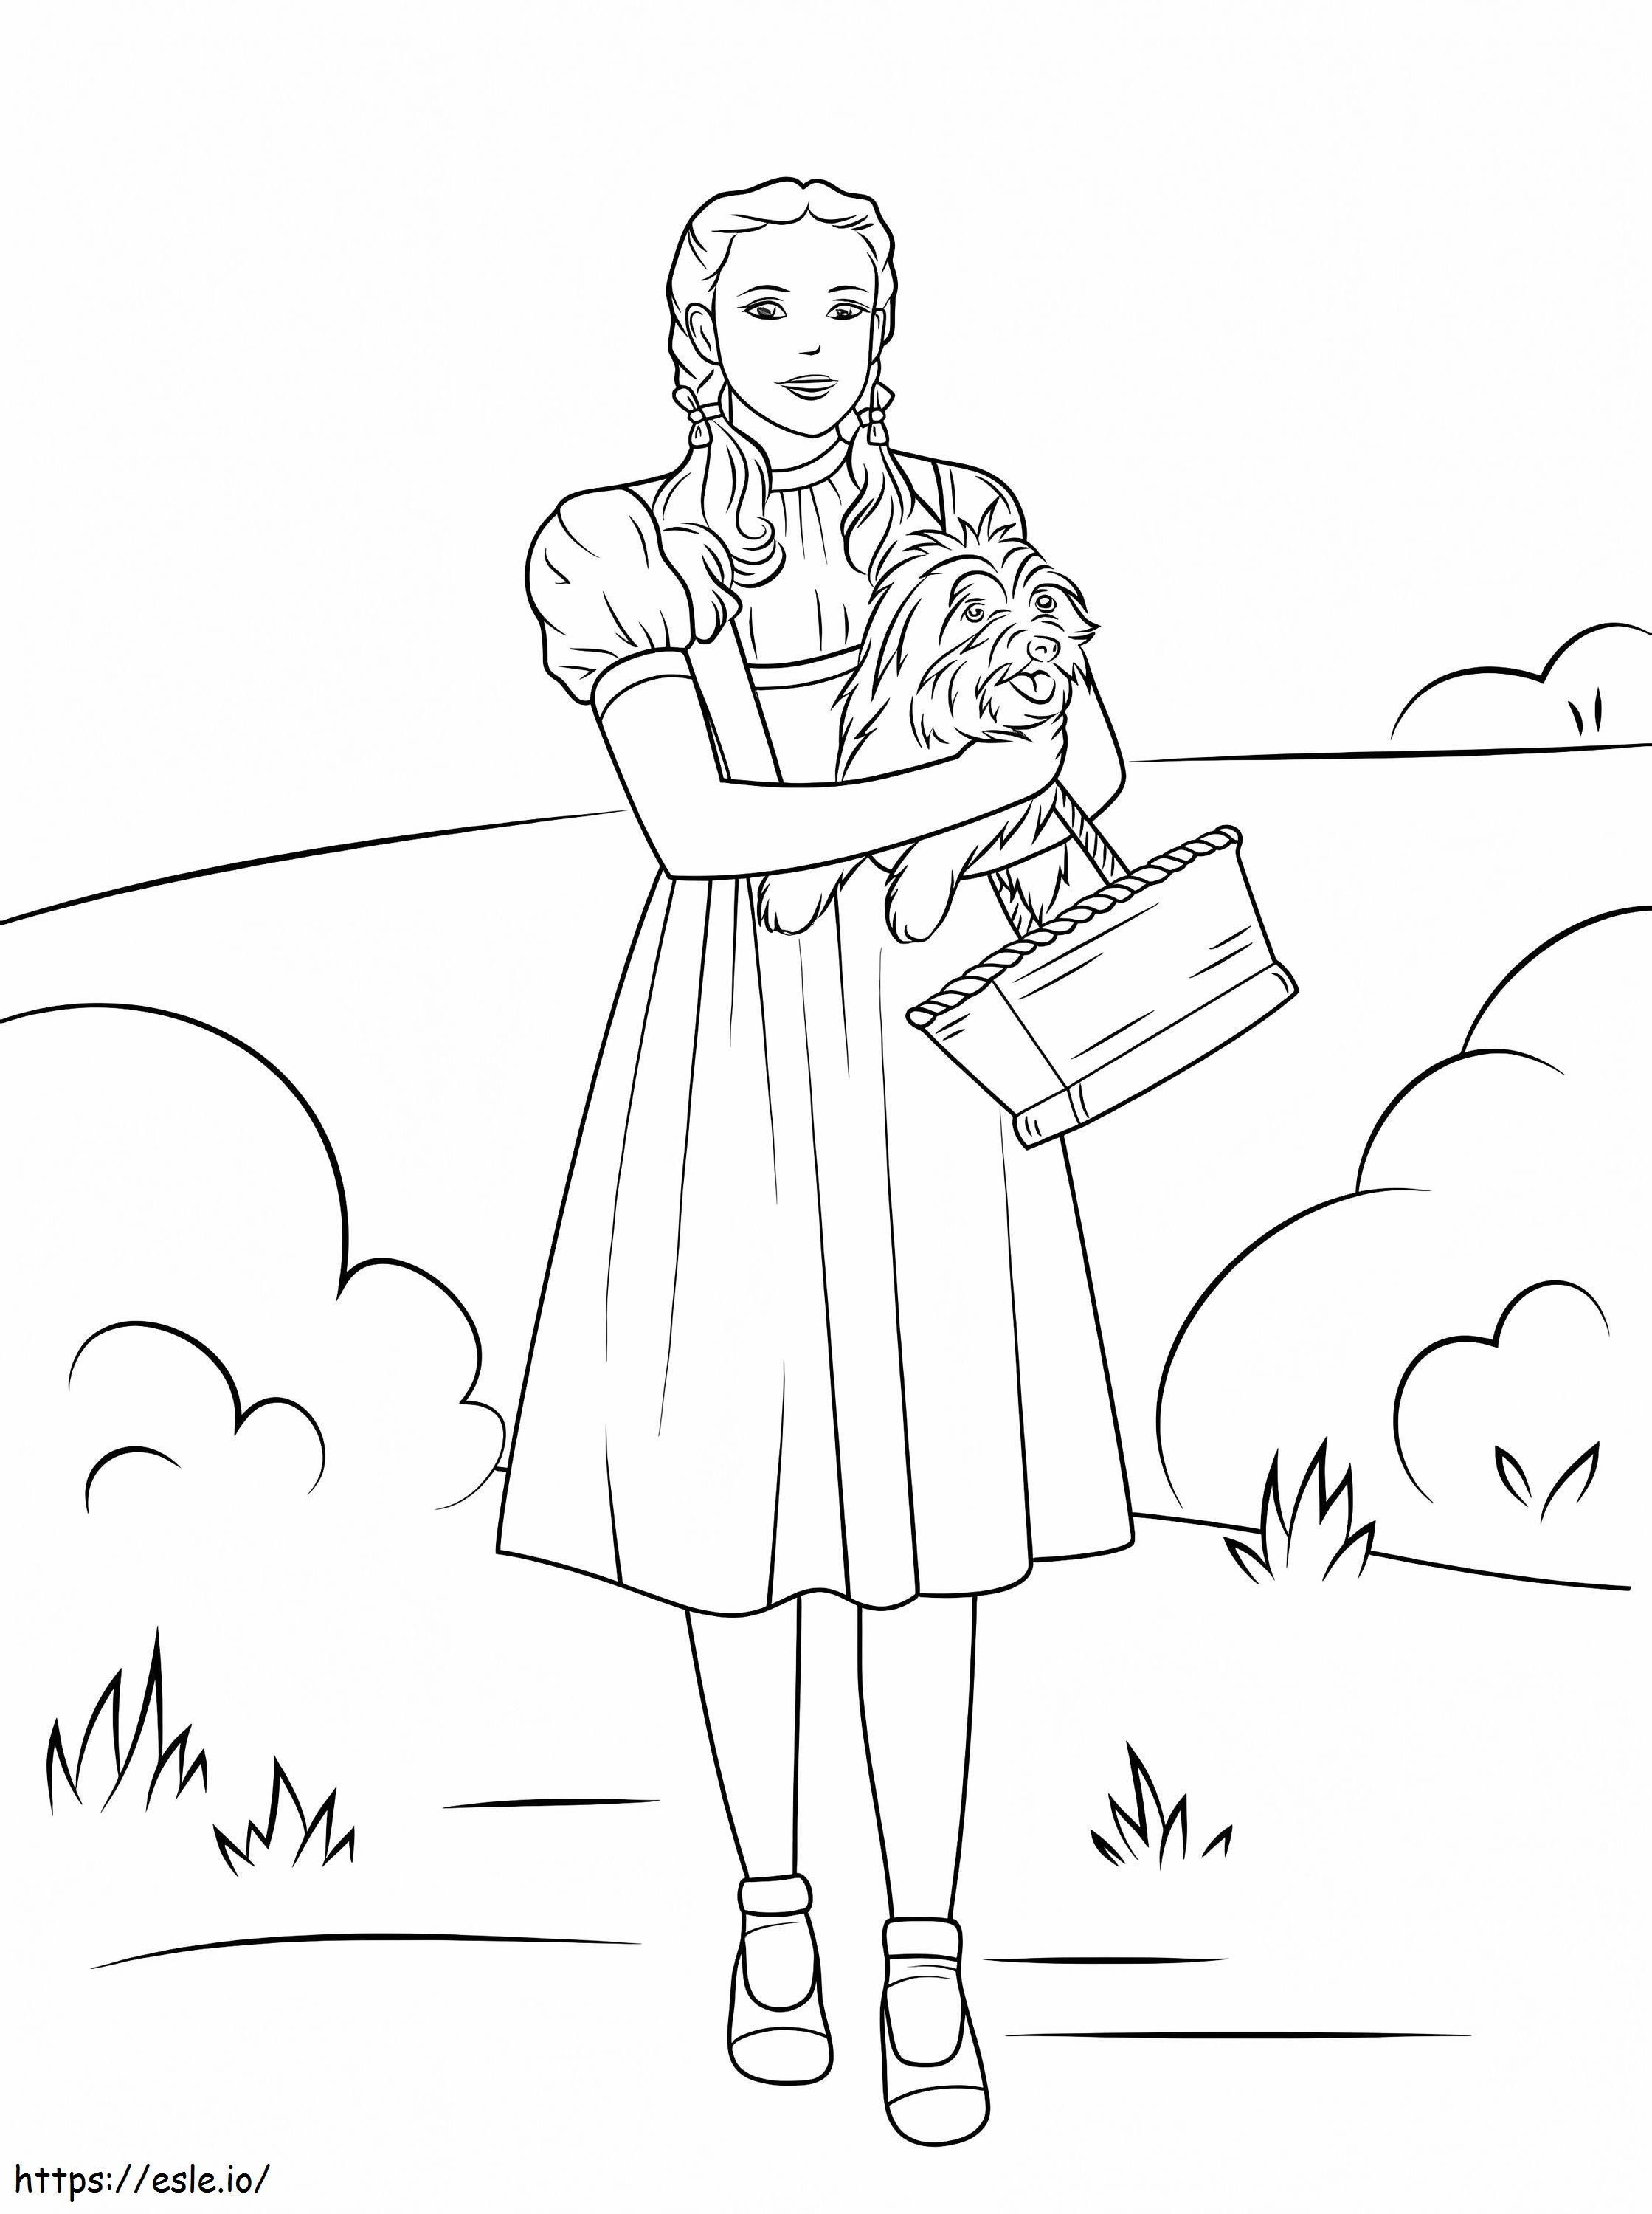 Dorothy Holding Toto coloring page